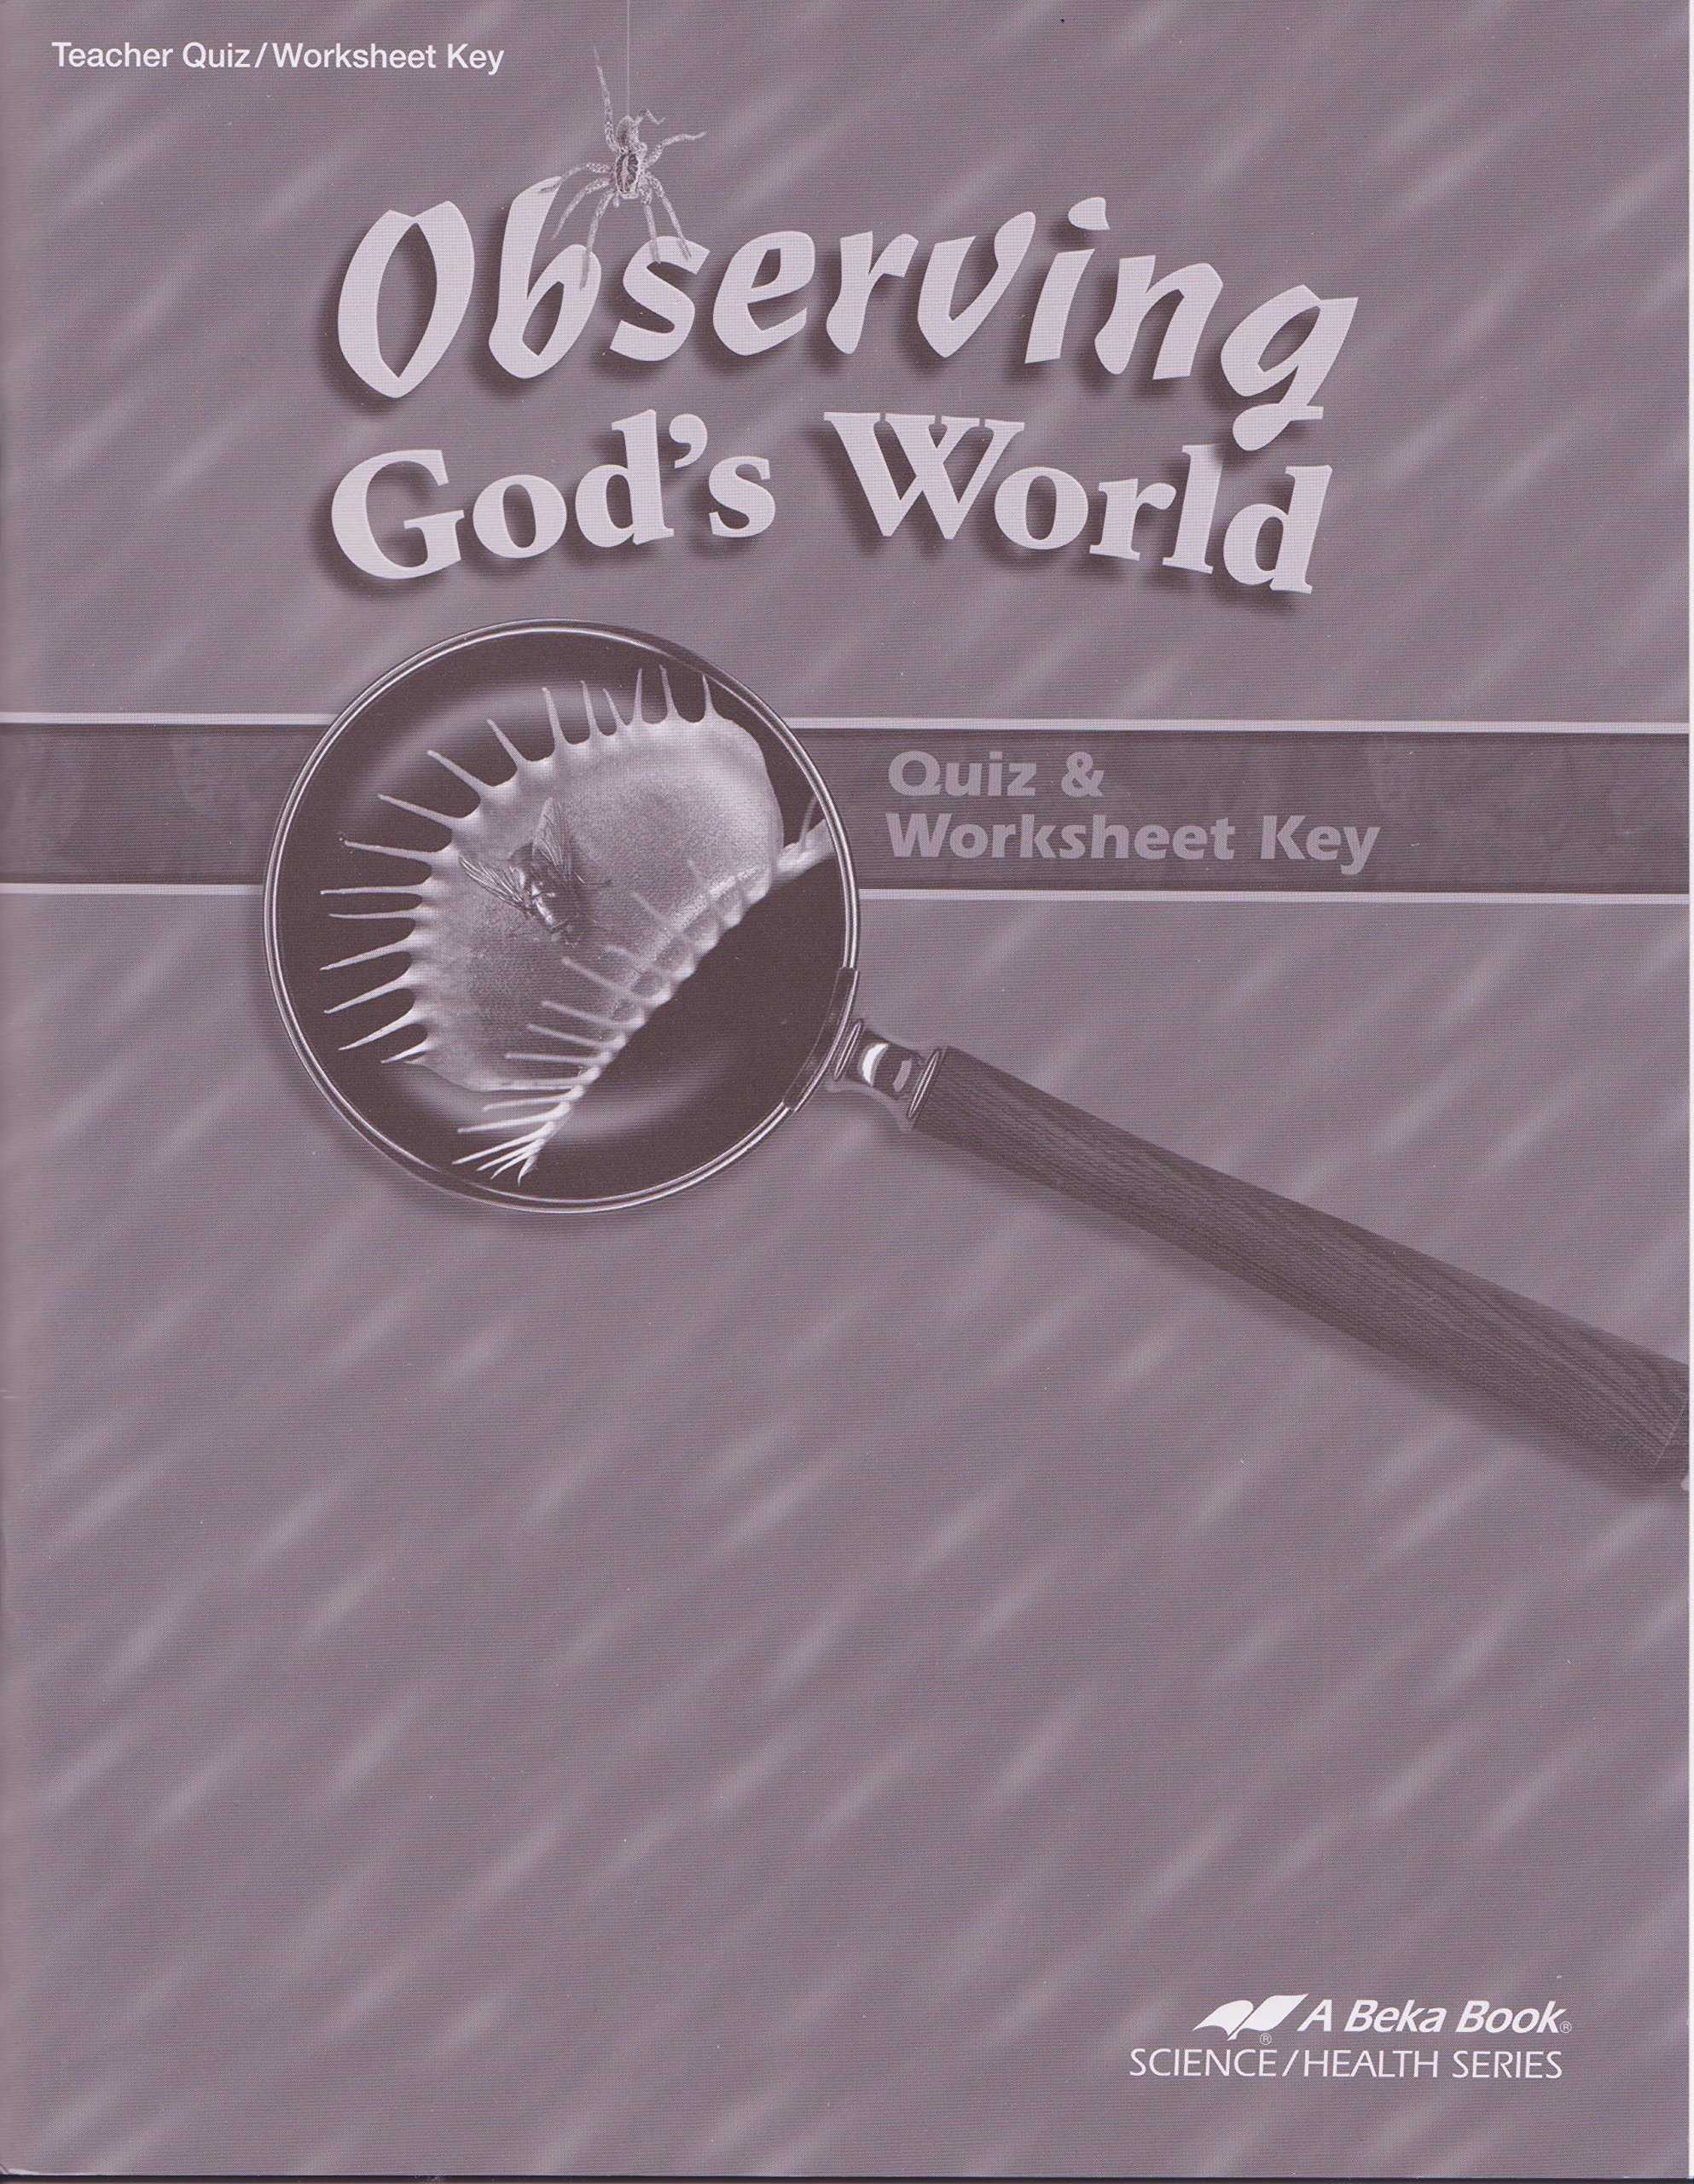 Theater Through the Ages Worksheet Answers as Well as Observing God S World 6 Quiz & Worksheet Key A Beka Book Science